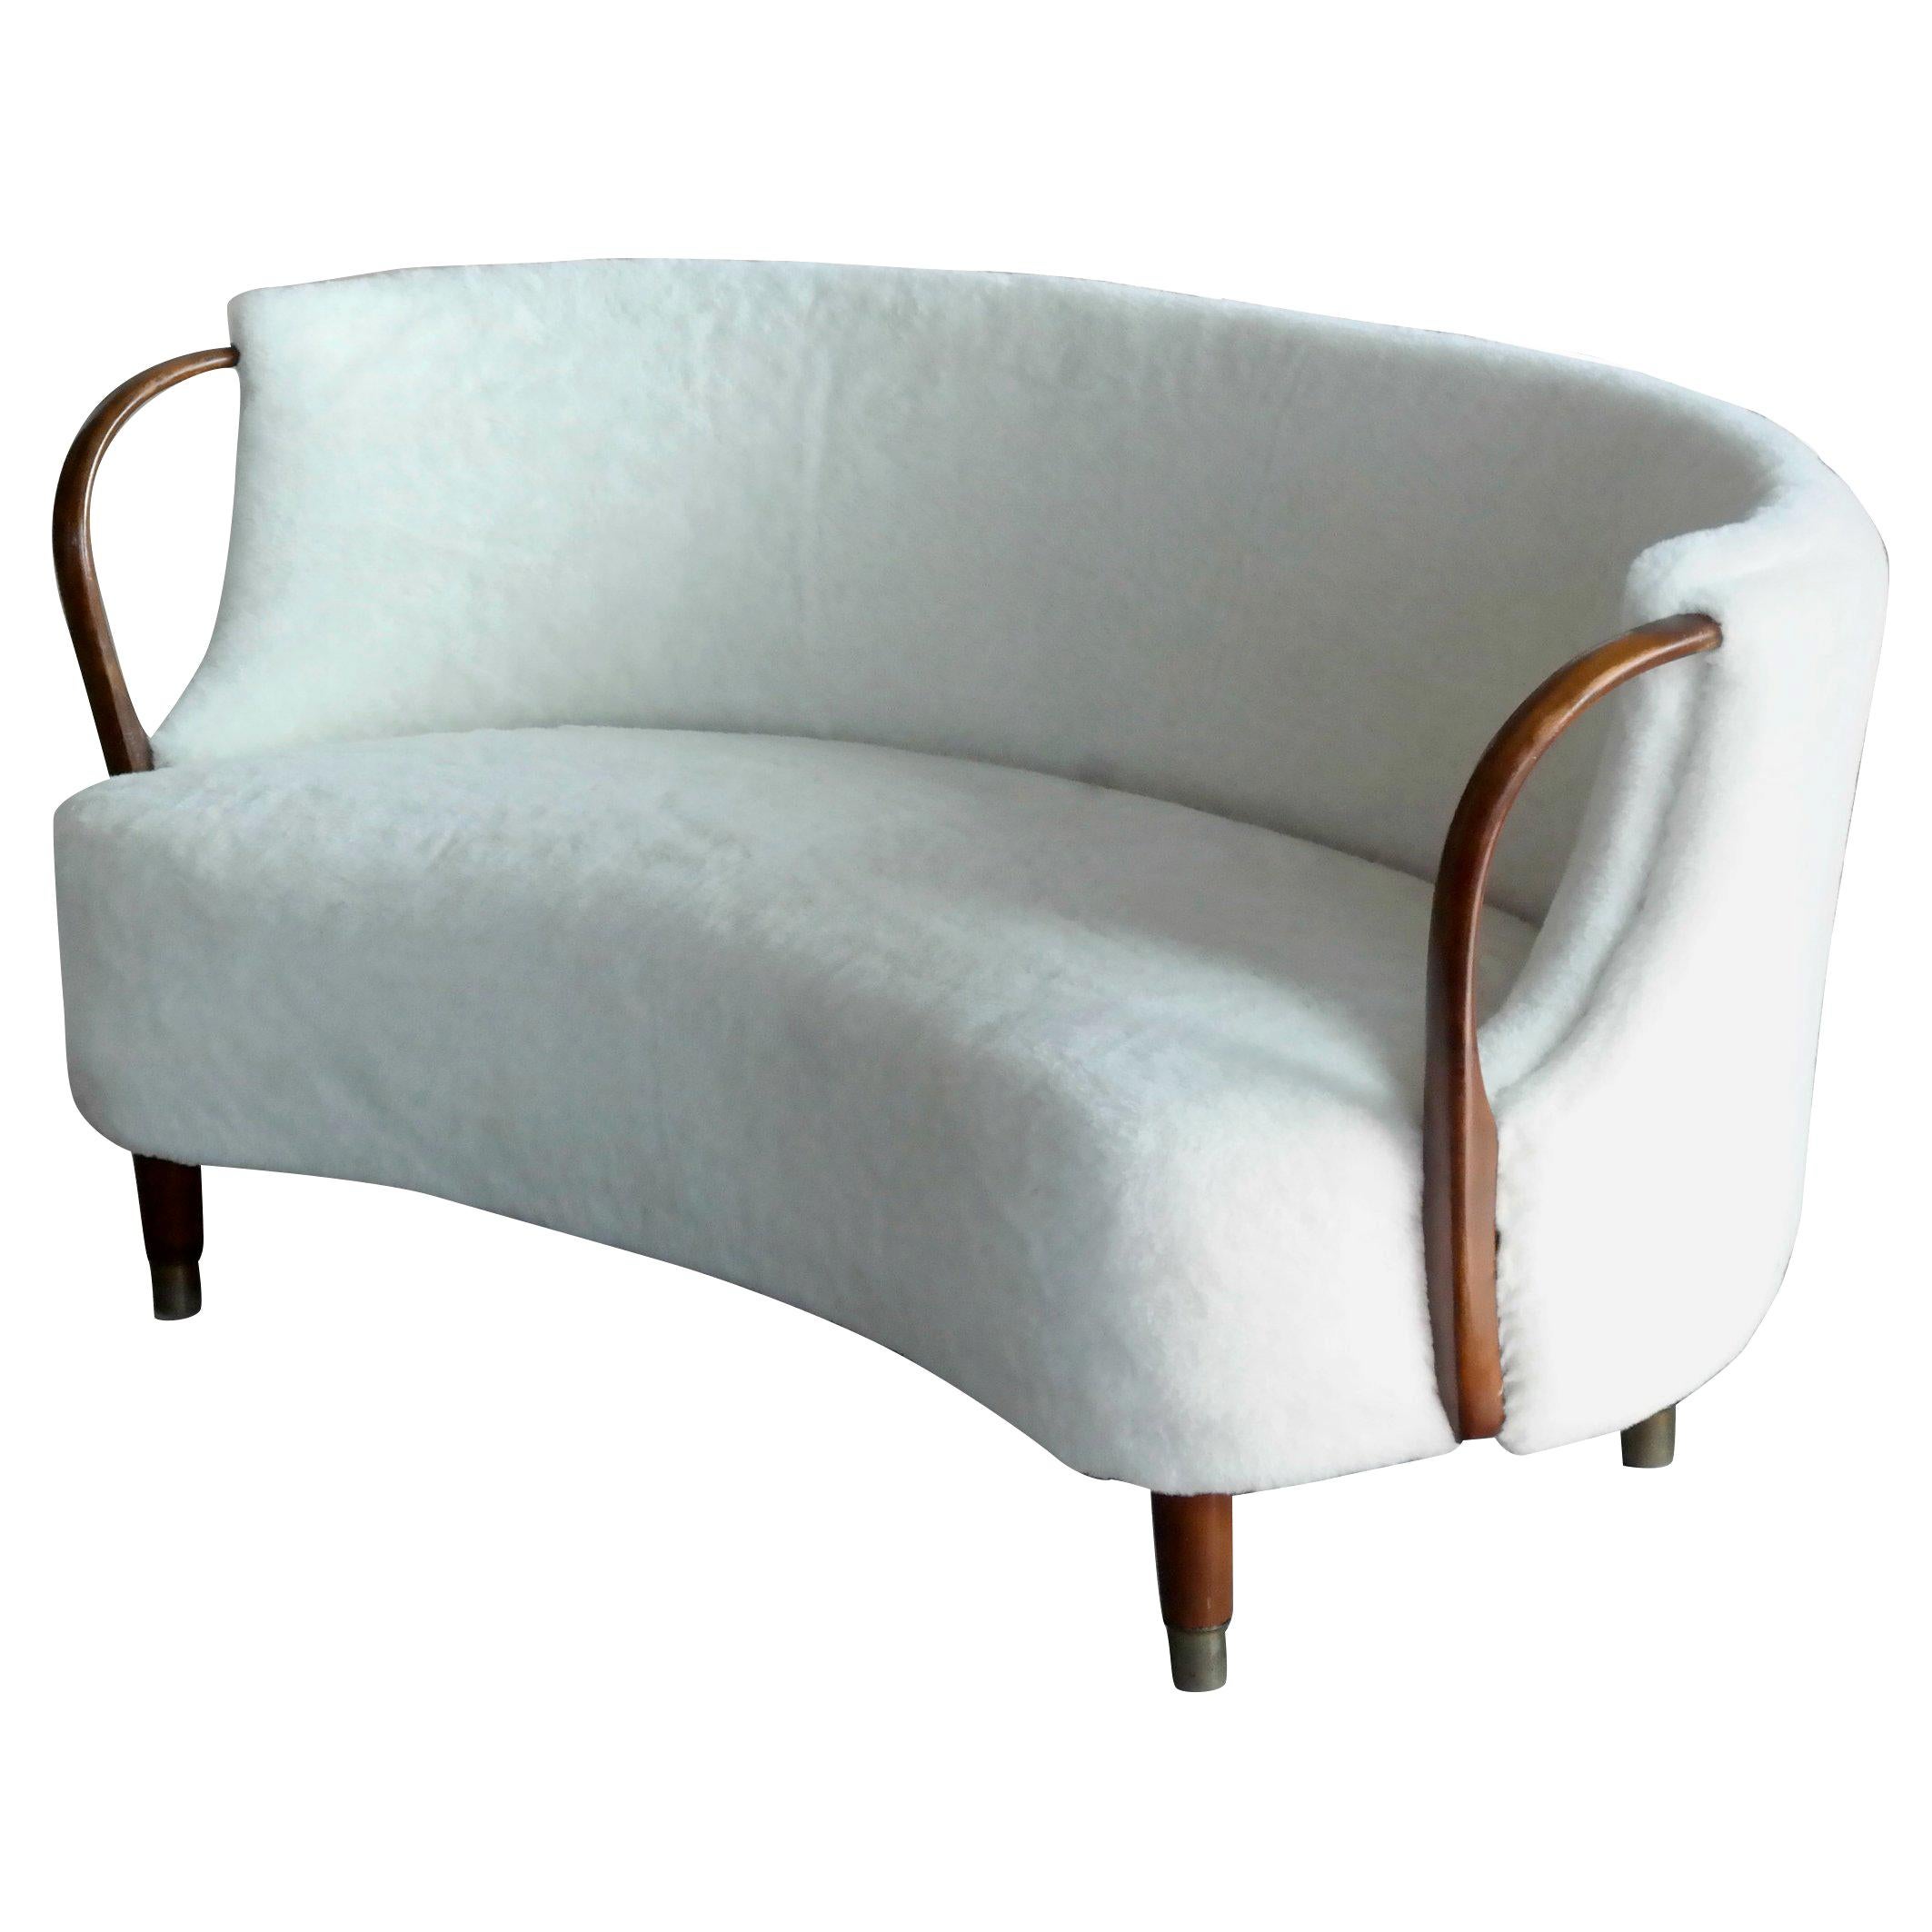 Viggo Boesen Style Curved Sofa Model No. 96 in Lambswool by N.A. Jørgensen